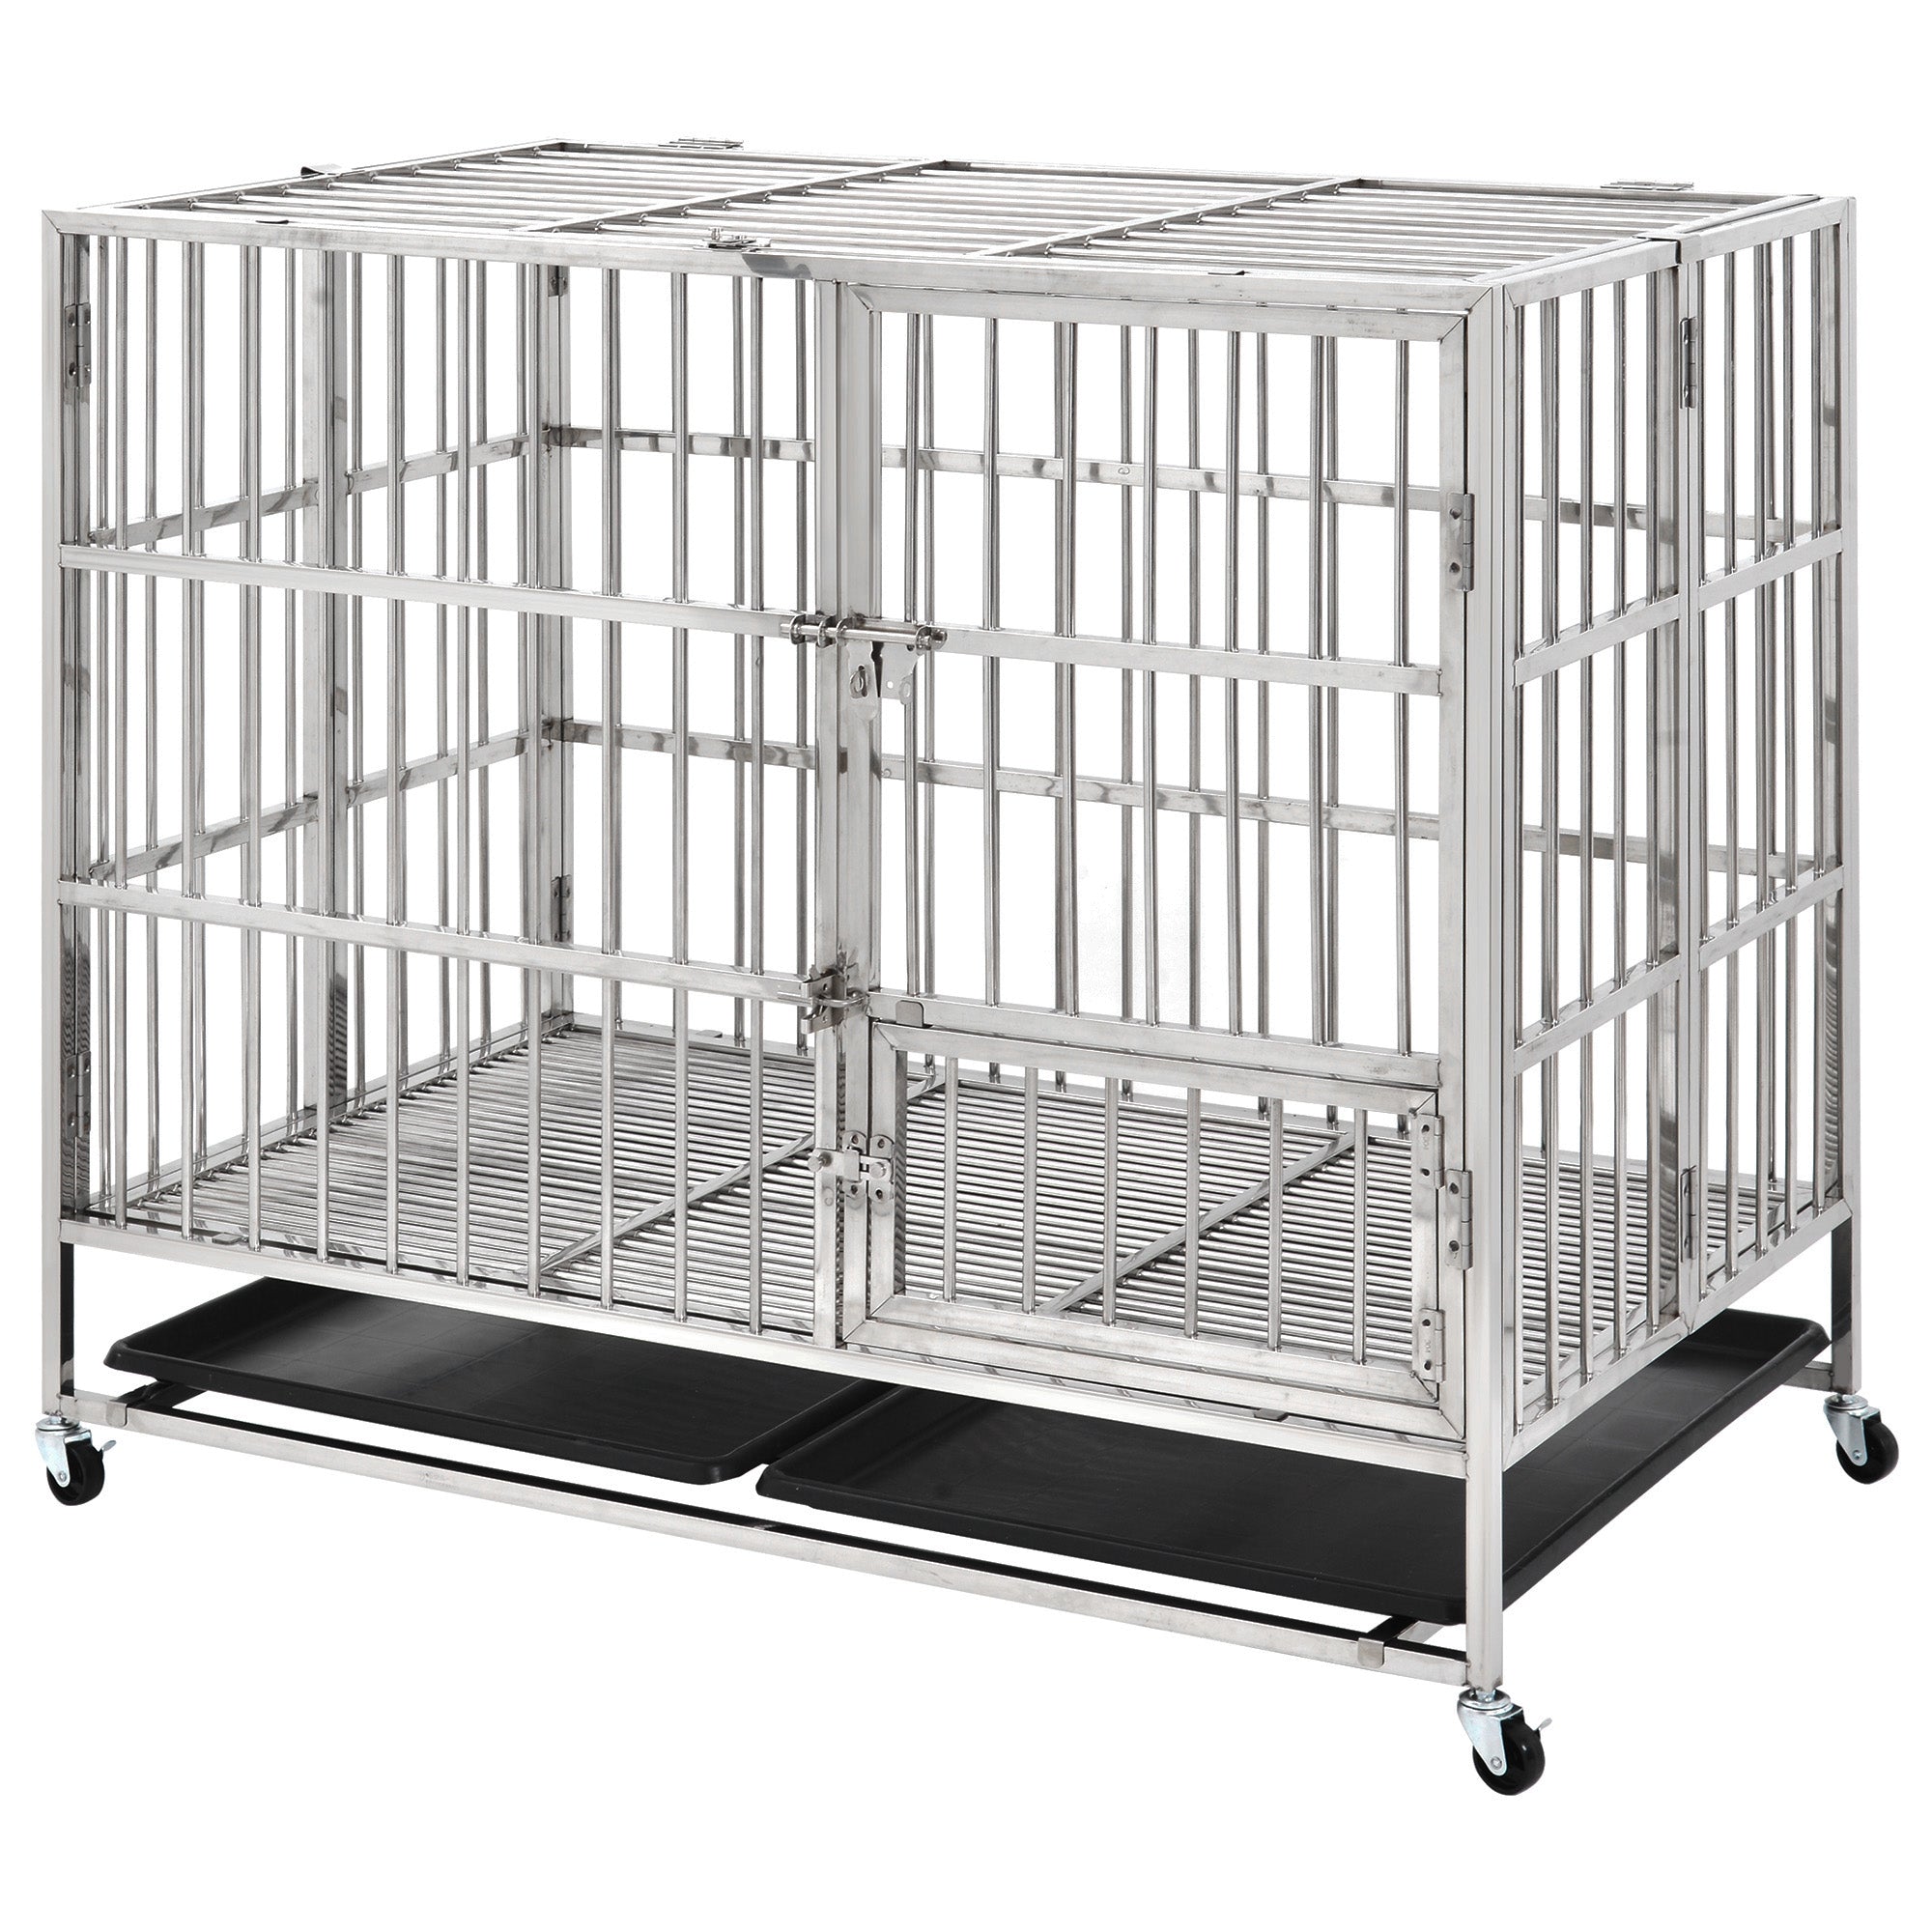 Stainless Steel Dog Crate Cage Kennel Easy Folding Pre-assembly No Screw No Tool Needed for Large Dogs 45 inch 115*76*79cm